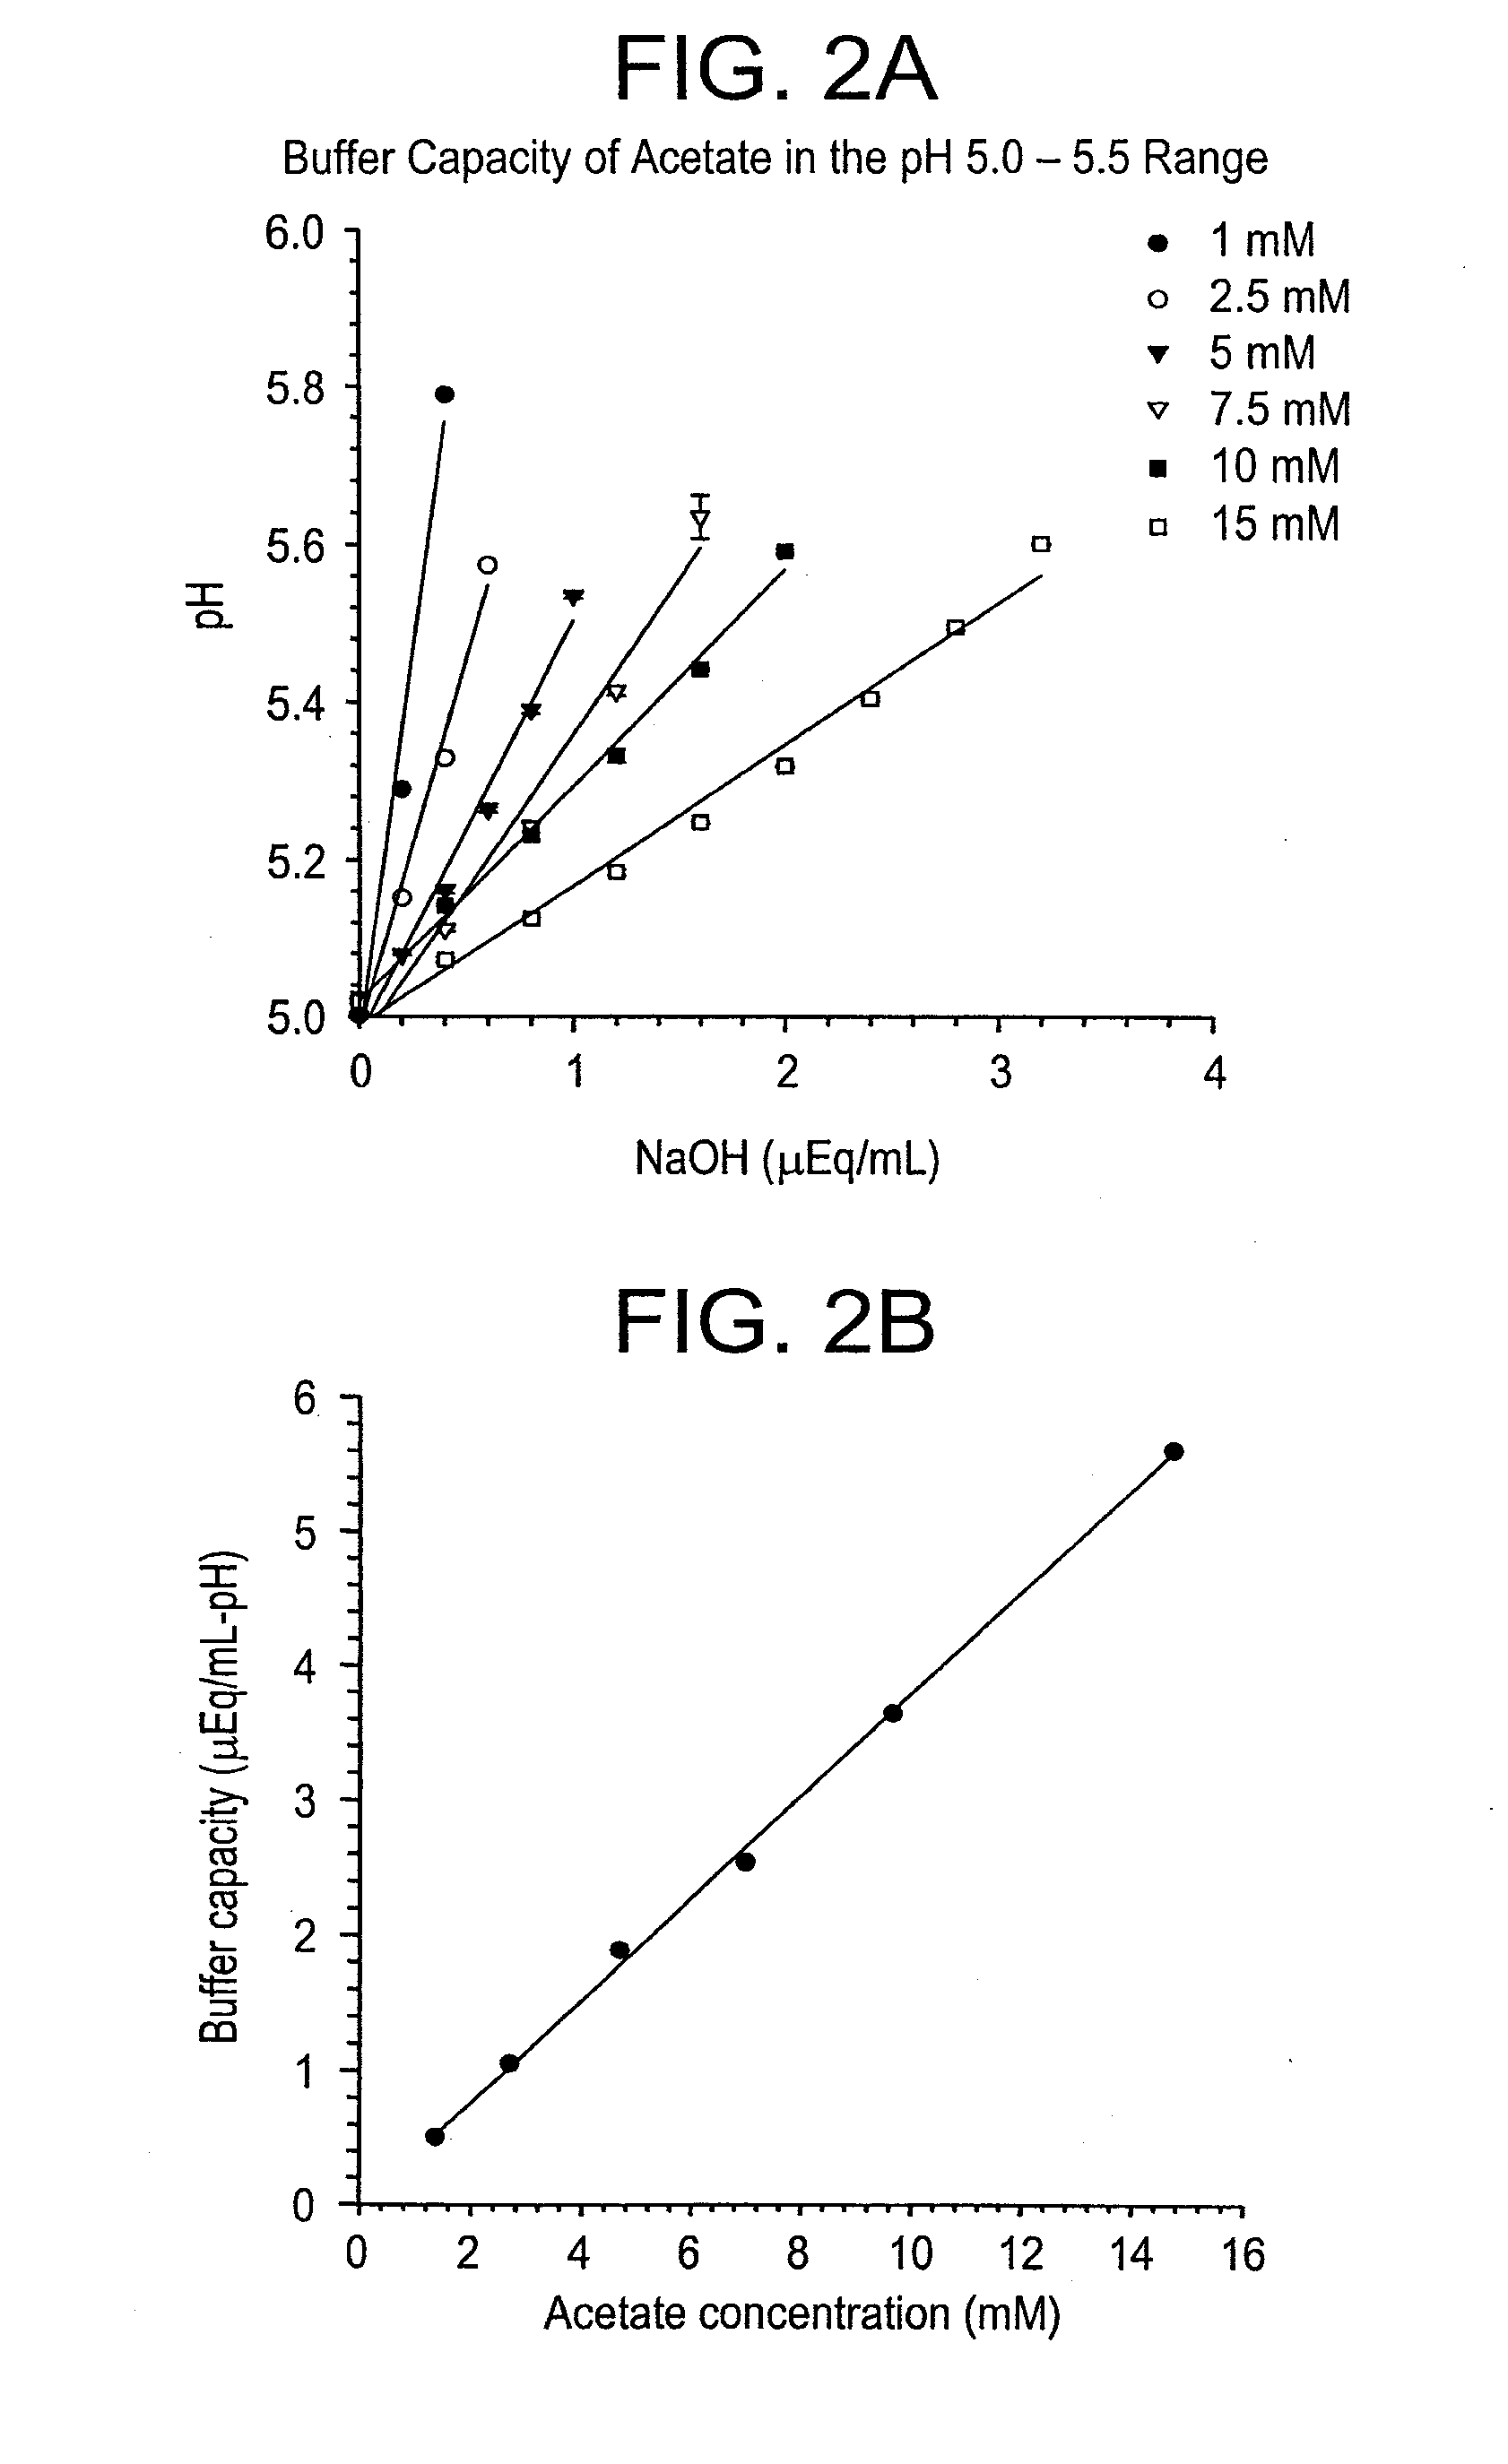 Self-Buffering Protein Formulations